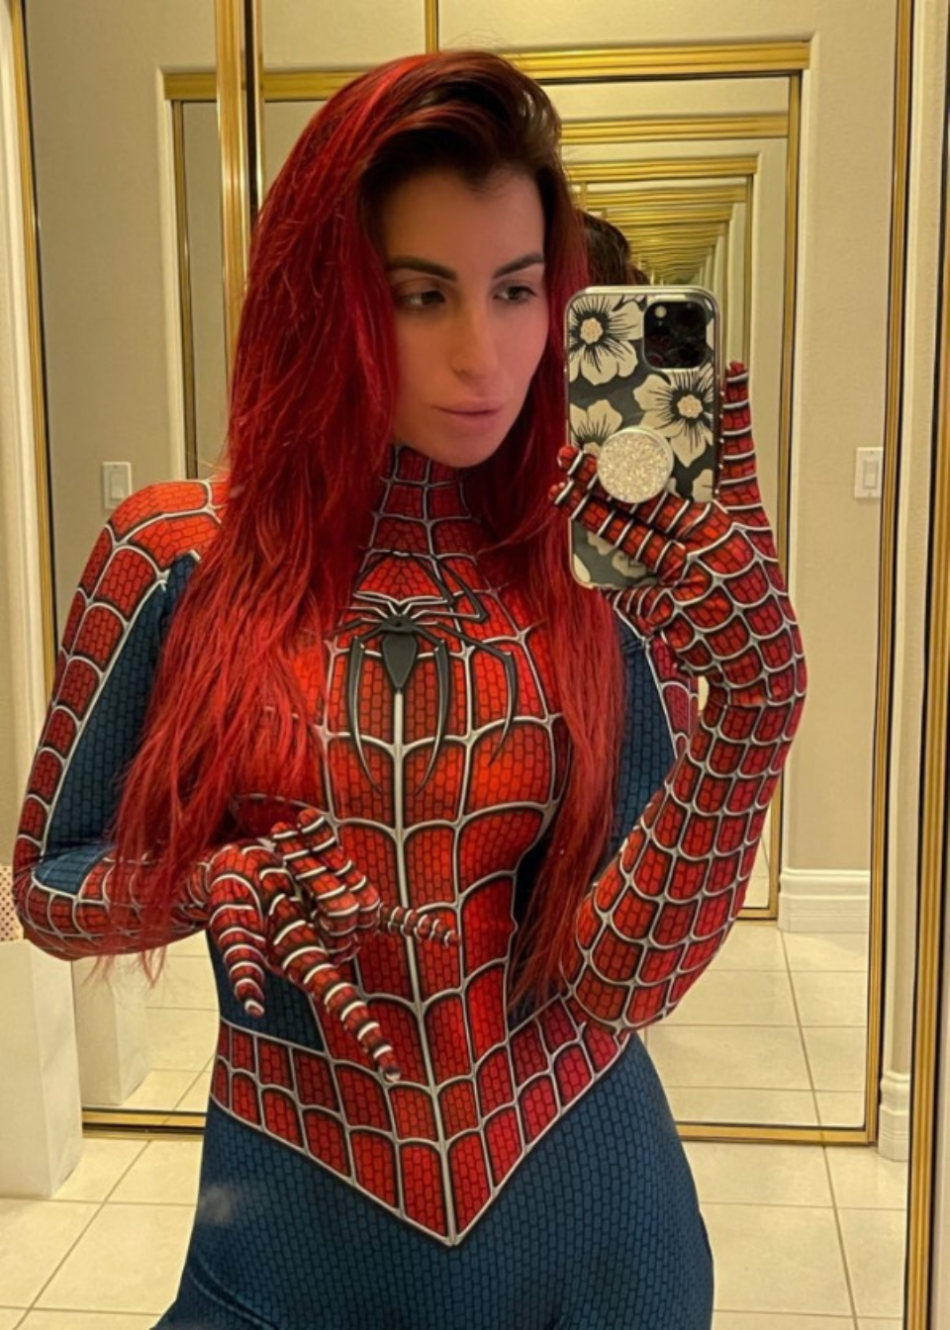 Sexy Red Hot Cosplay Girls Spiderman Women Best Photo Compilation 2021 (89 HQ Photos) 502